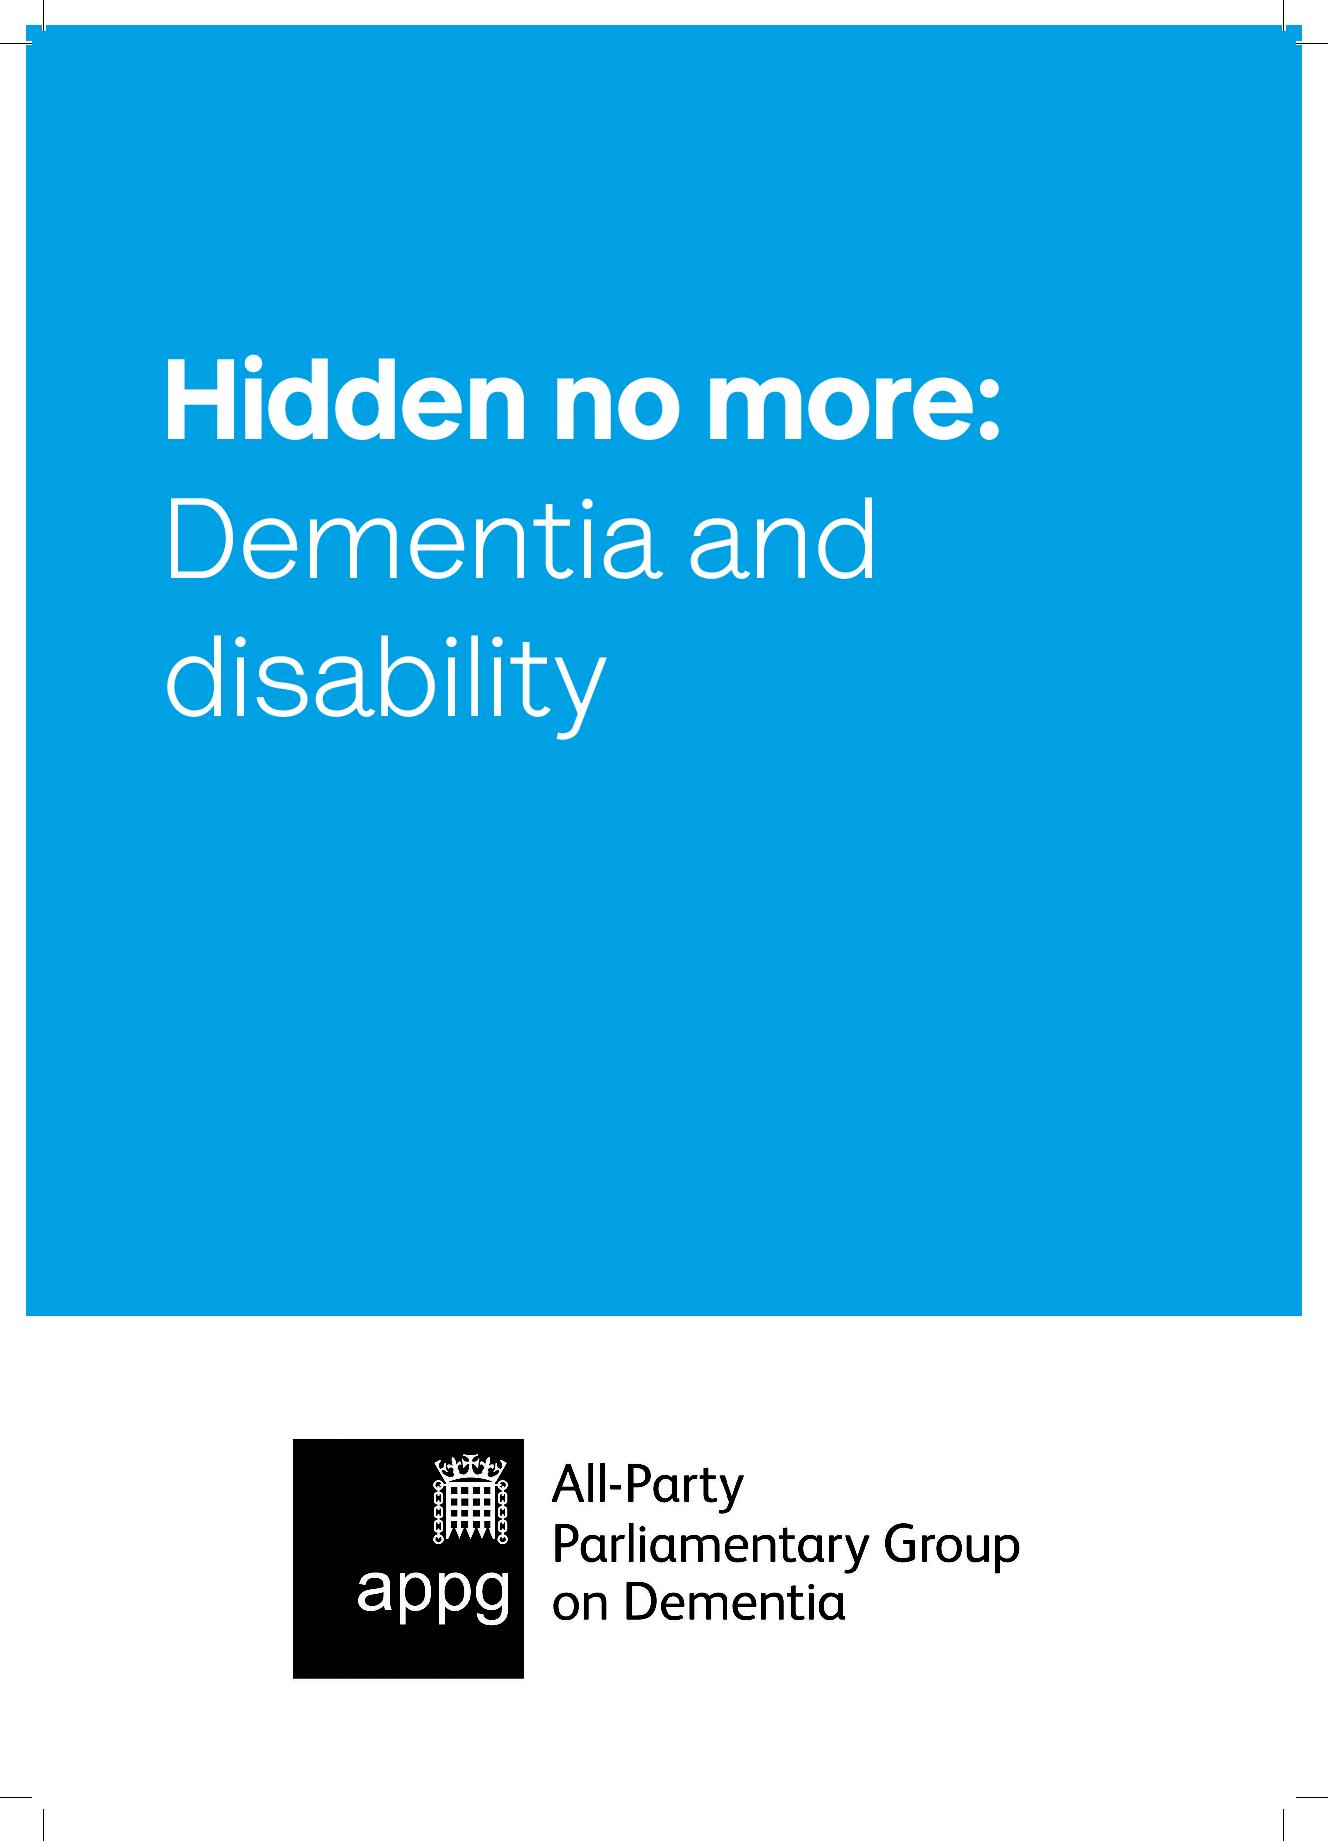 Hidden No more: Dementia and Disability